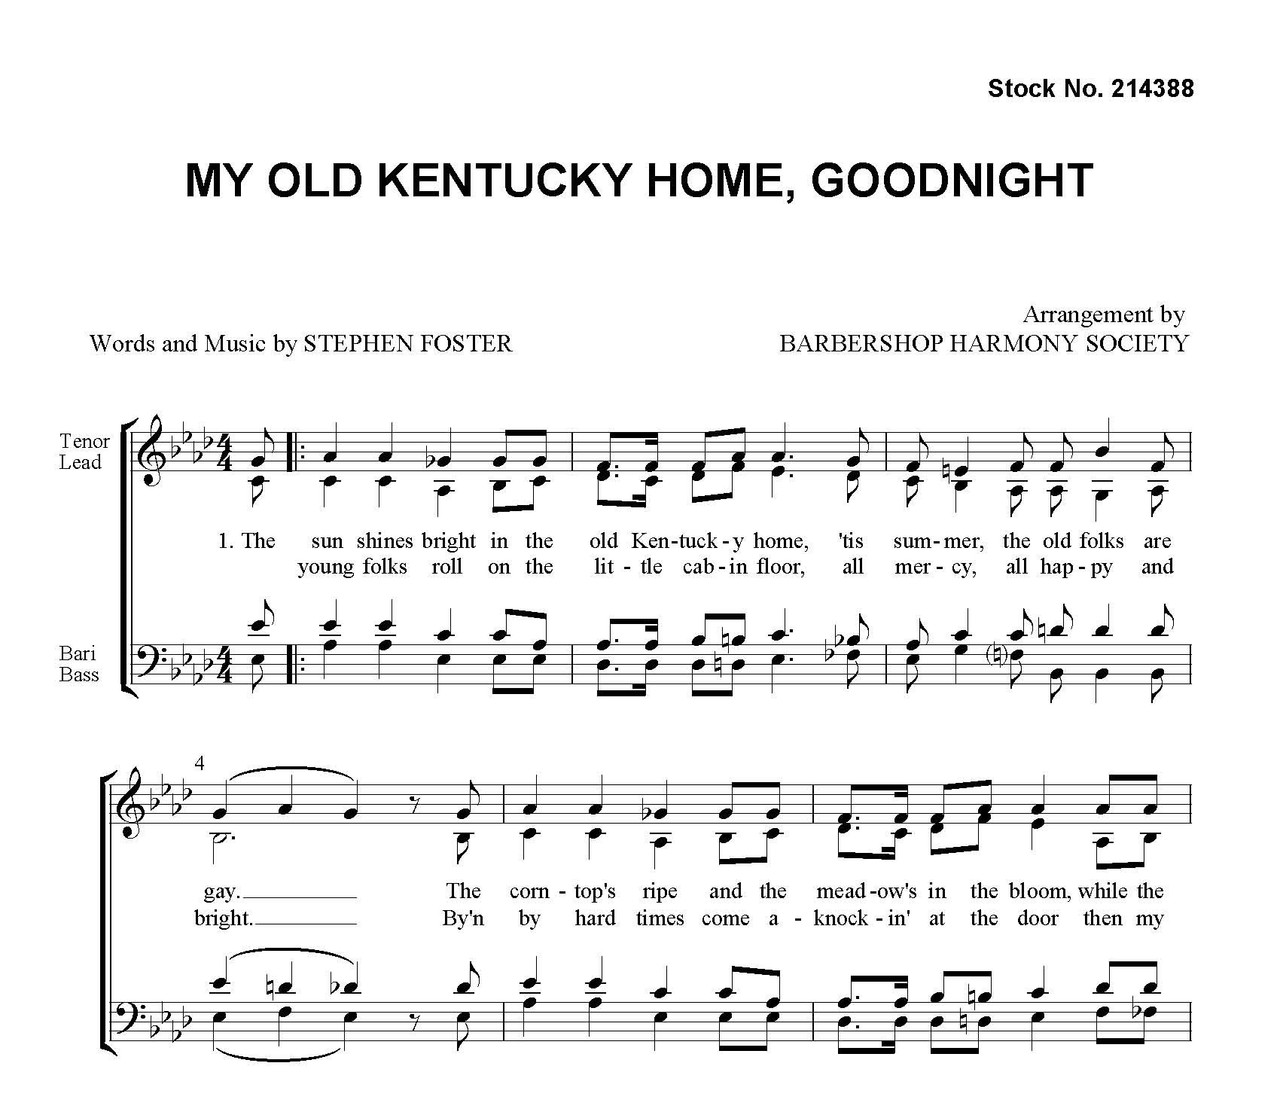 My Old Kentucky Home, Goodnight (SATB)